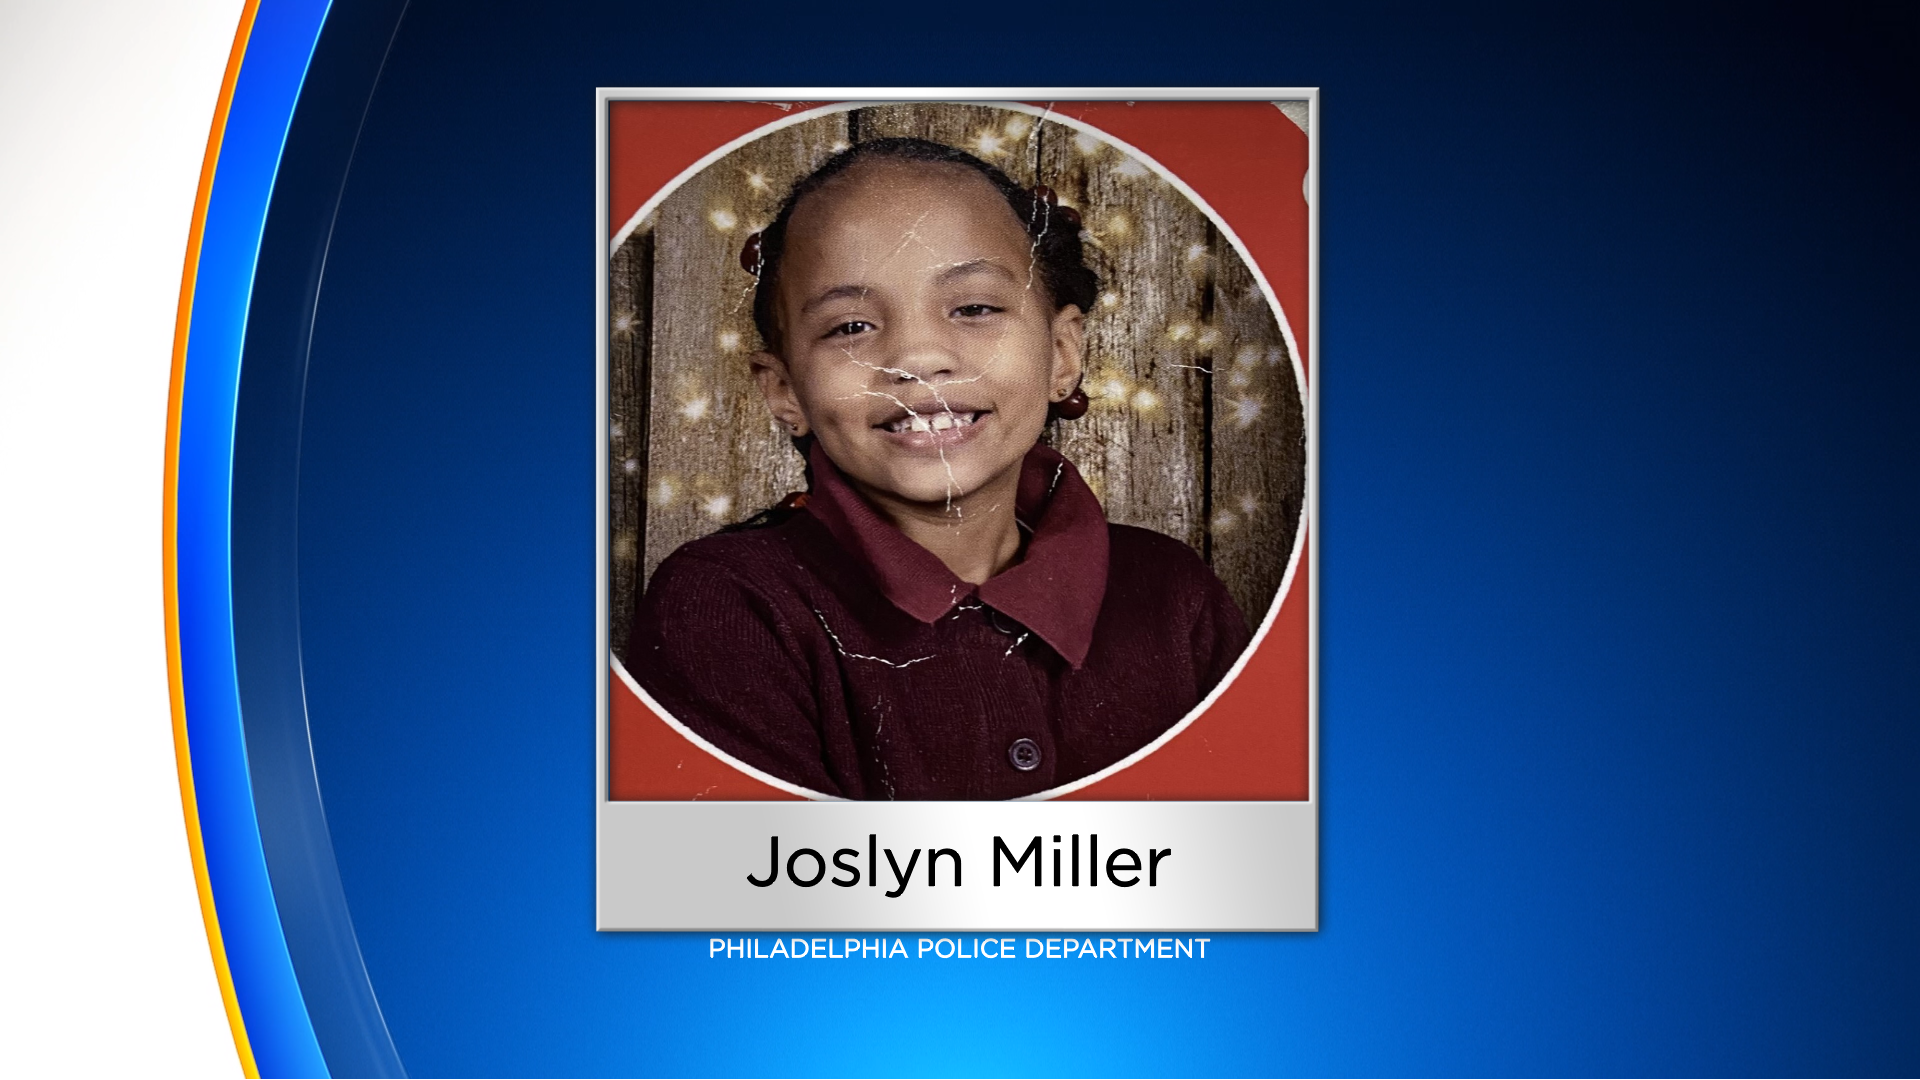 Philadelphia Police Searching For Missing 10-Year-Old Girl